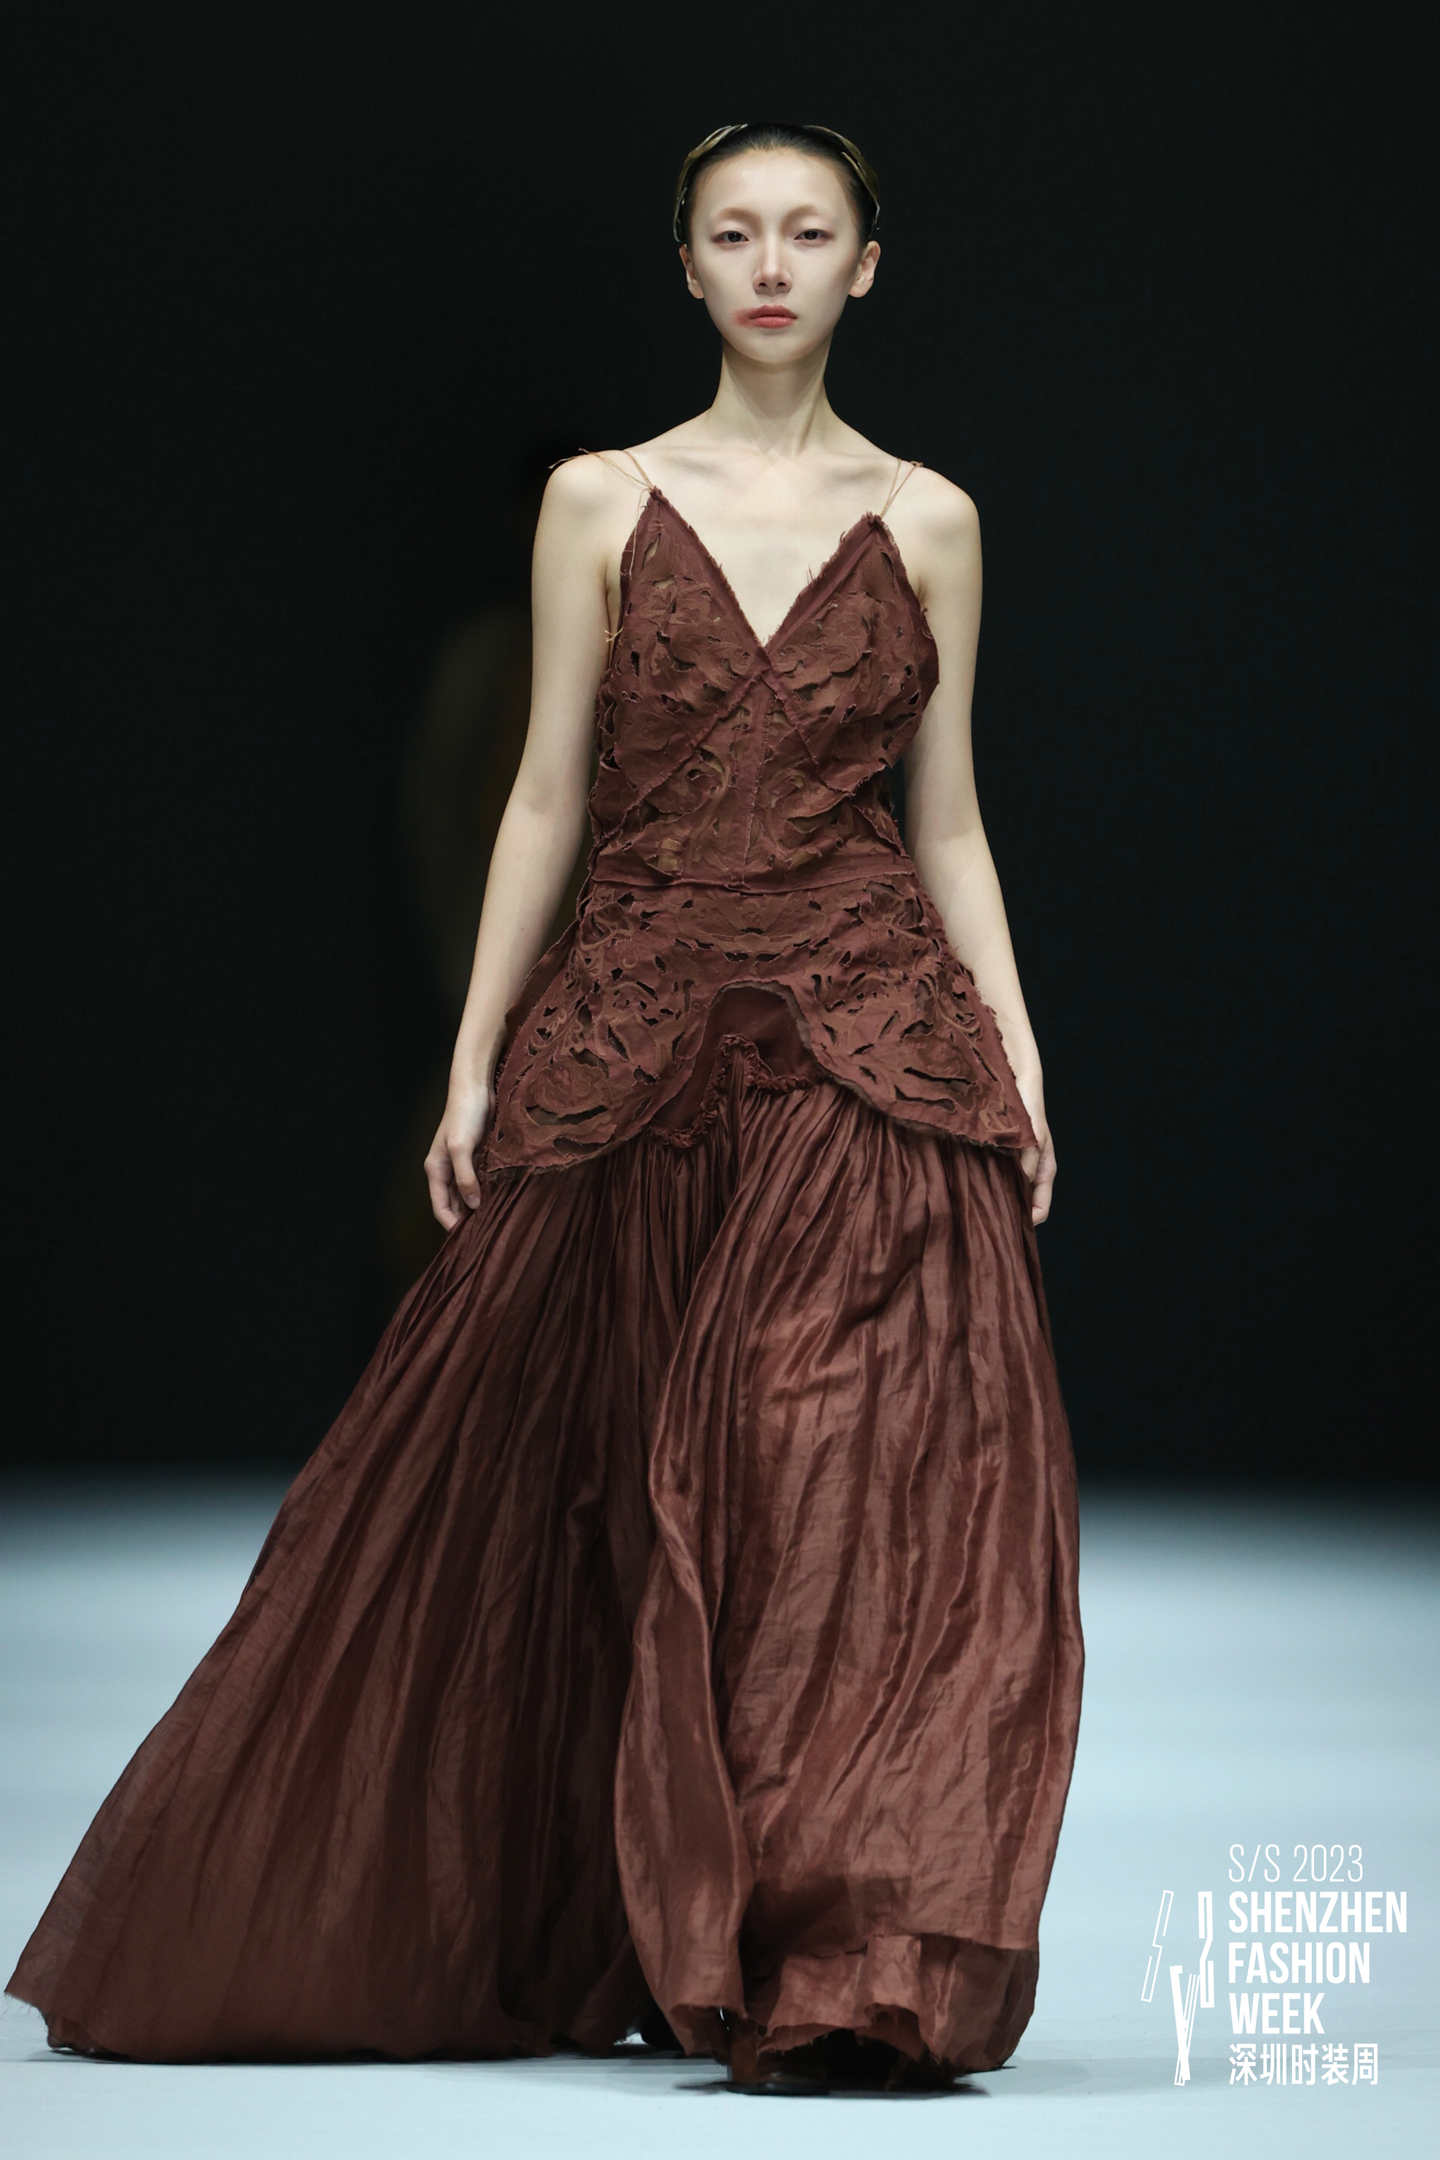 A look from the graduate collection by Istituto Marangoni Shenzhen Fashion Design student Yao Wenya